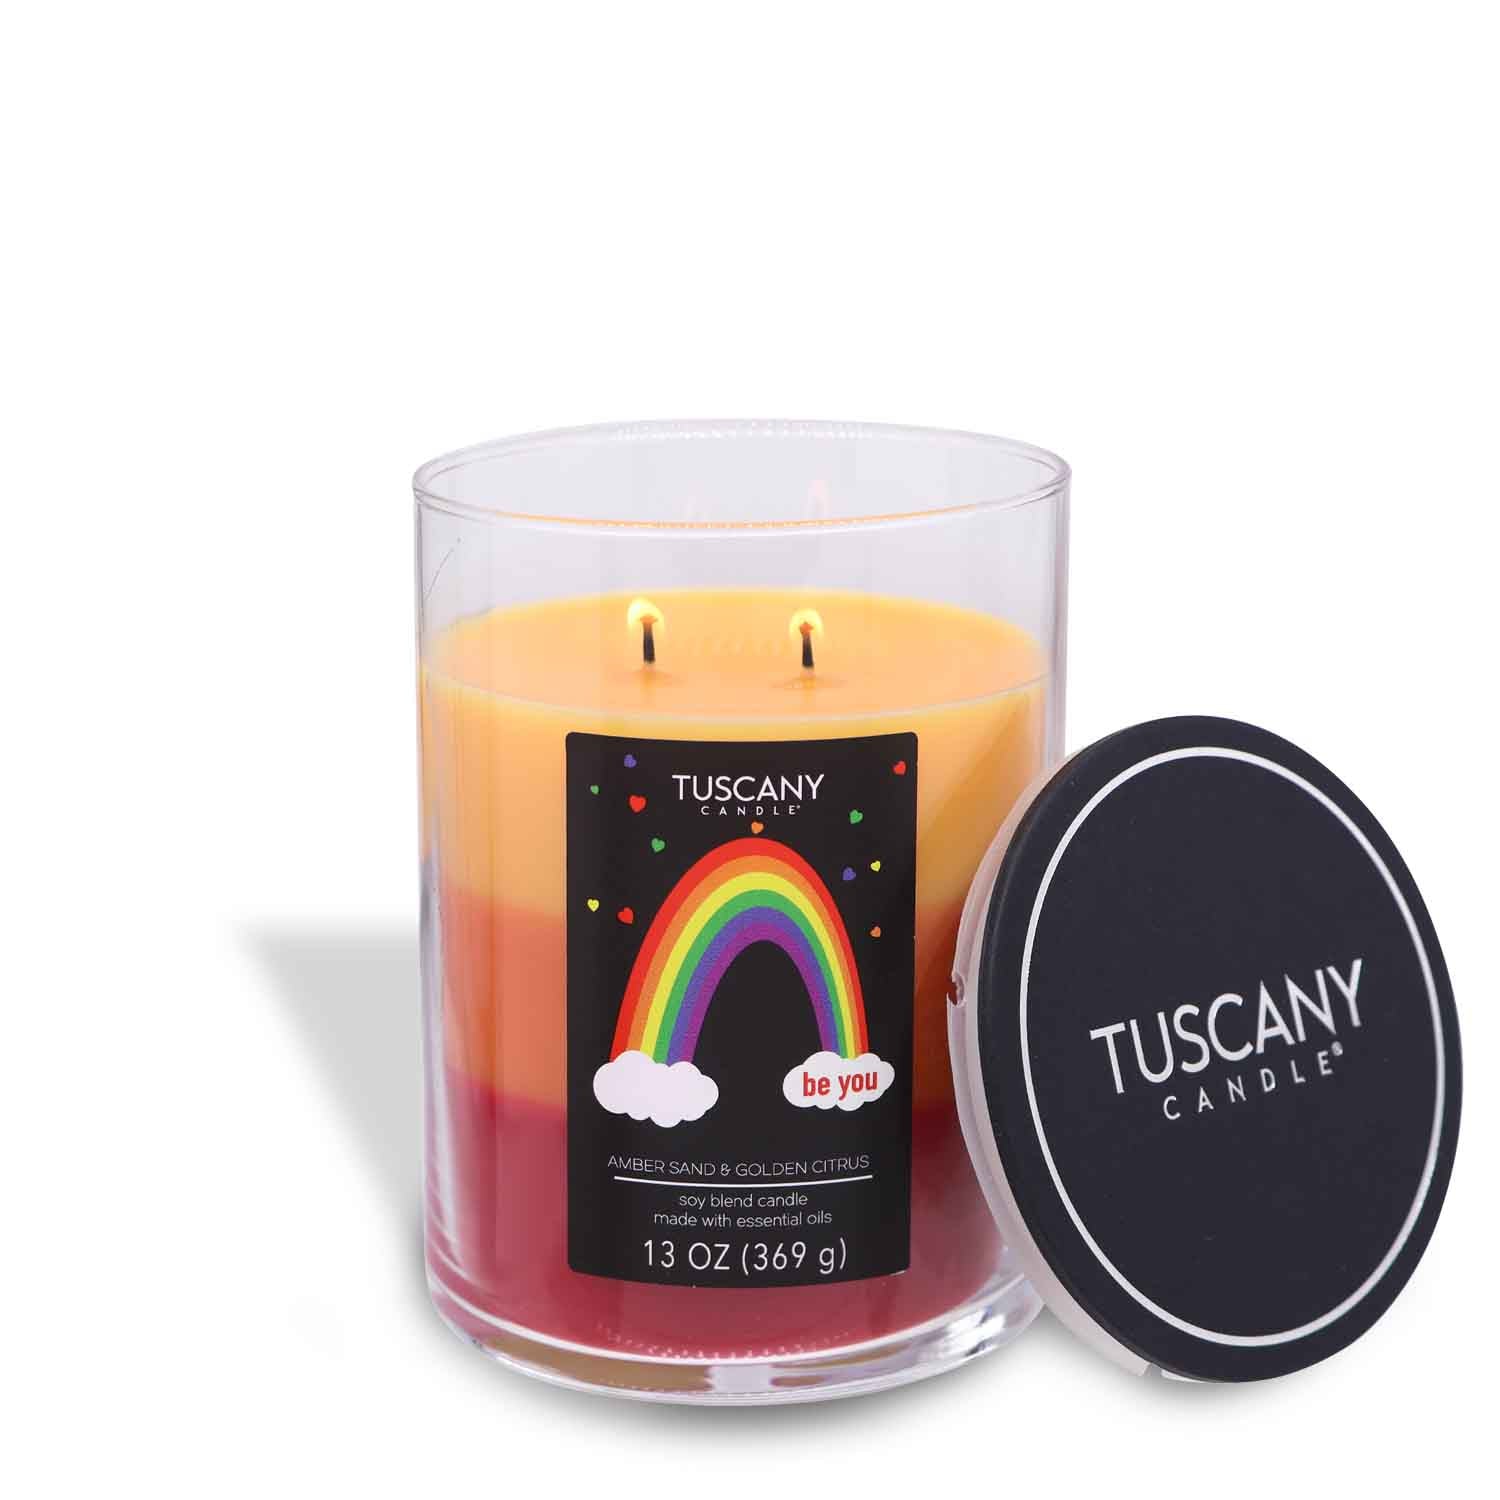 A Be You scented candle (13 oz) from the Pride collection featuring a vibrant rainbow motif by Tuscany Candle® SEASONAL.